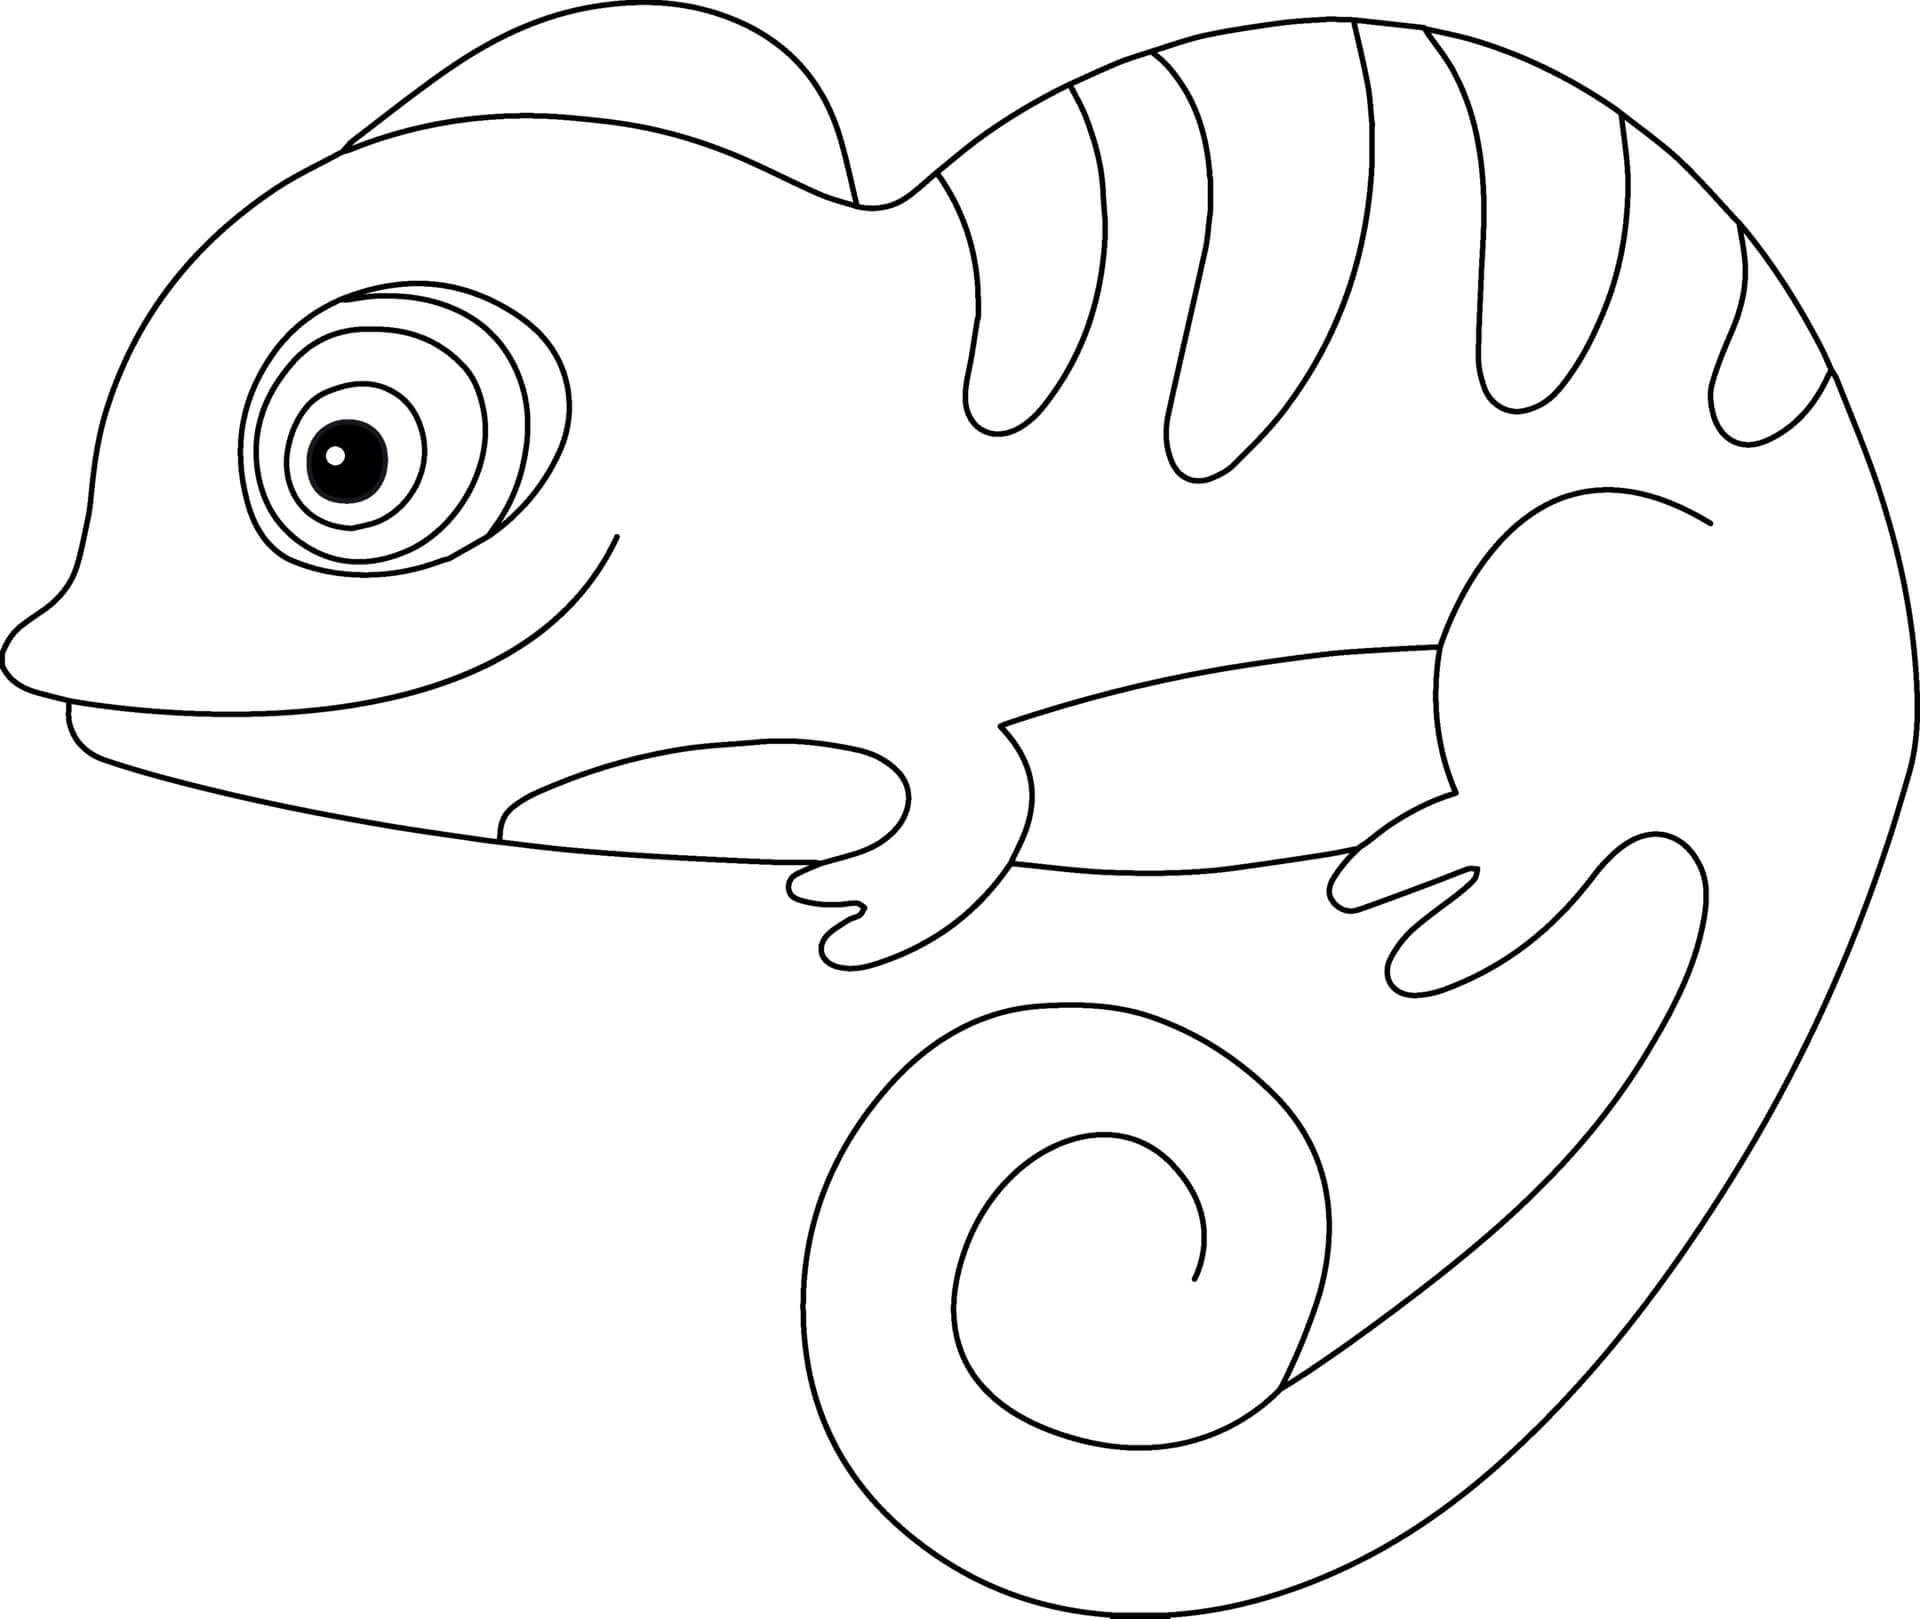 Chameleon Coloring Page